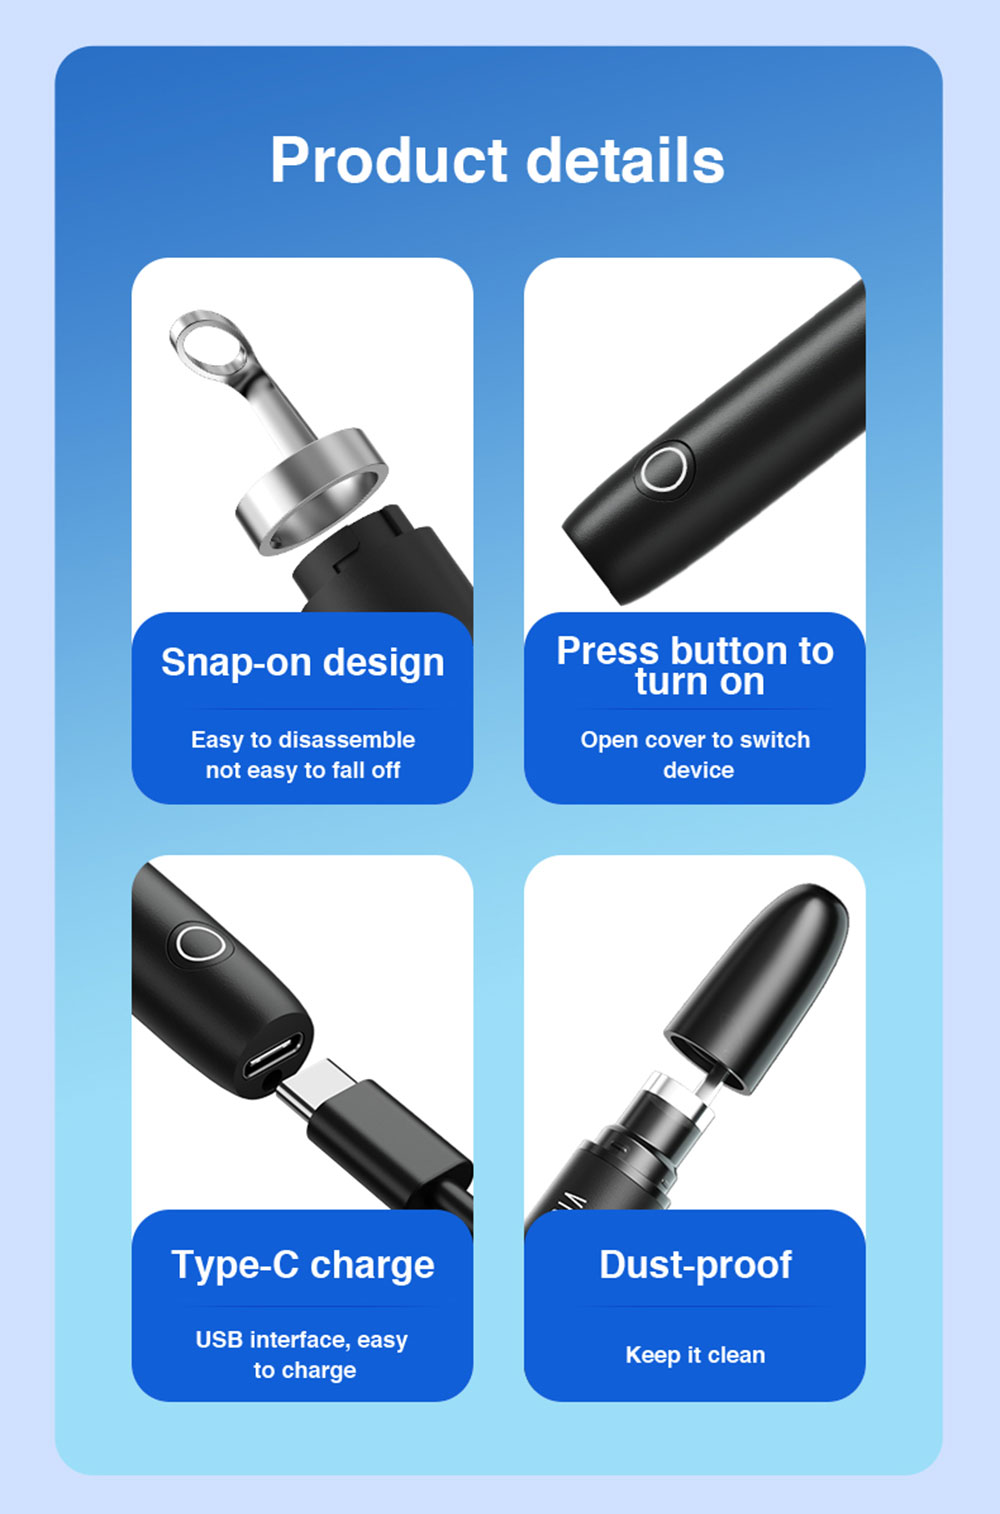 SUNUO M5 Smart Visual Acne Cleaner Squeezing Tool, 5MP HD Camera, 20X Magnification, 240mAh Battery, WiFi Connection